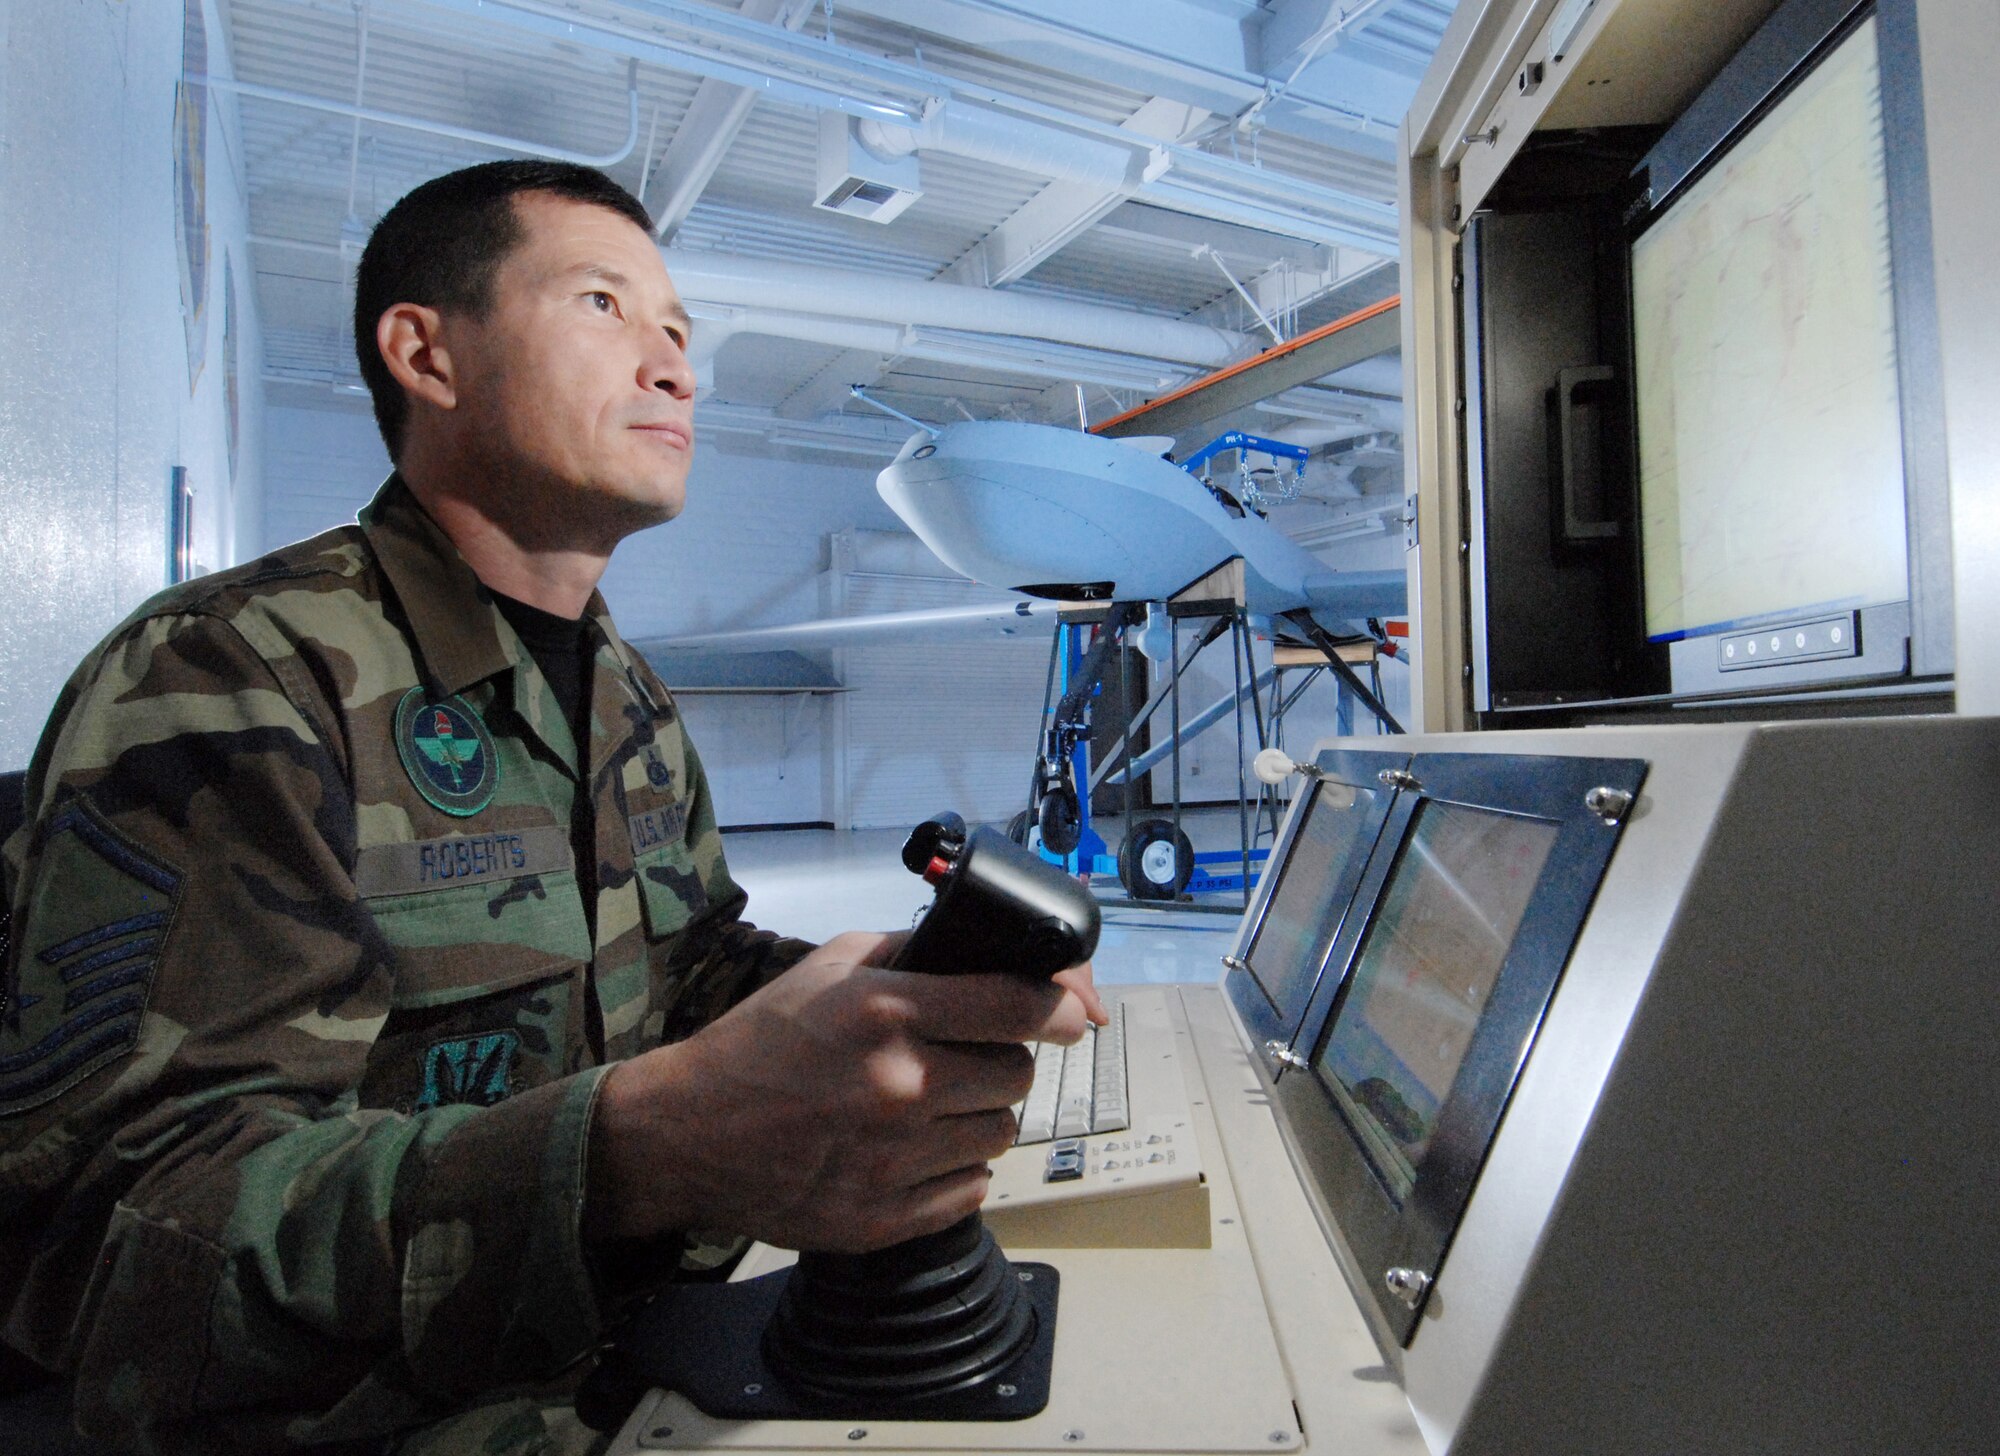 Master Sgt. Fred Roberts, an instructor assigned to FTD, 163 MXG, uses a Single Base Station maintenance interface station to check an MQ-1 Predator unmanned aerial vehicle. (U.S. Air Force photo by Val Gempis)